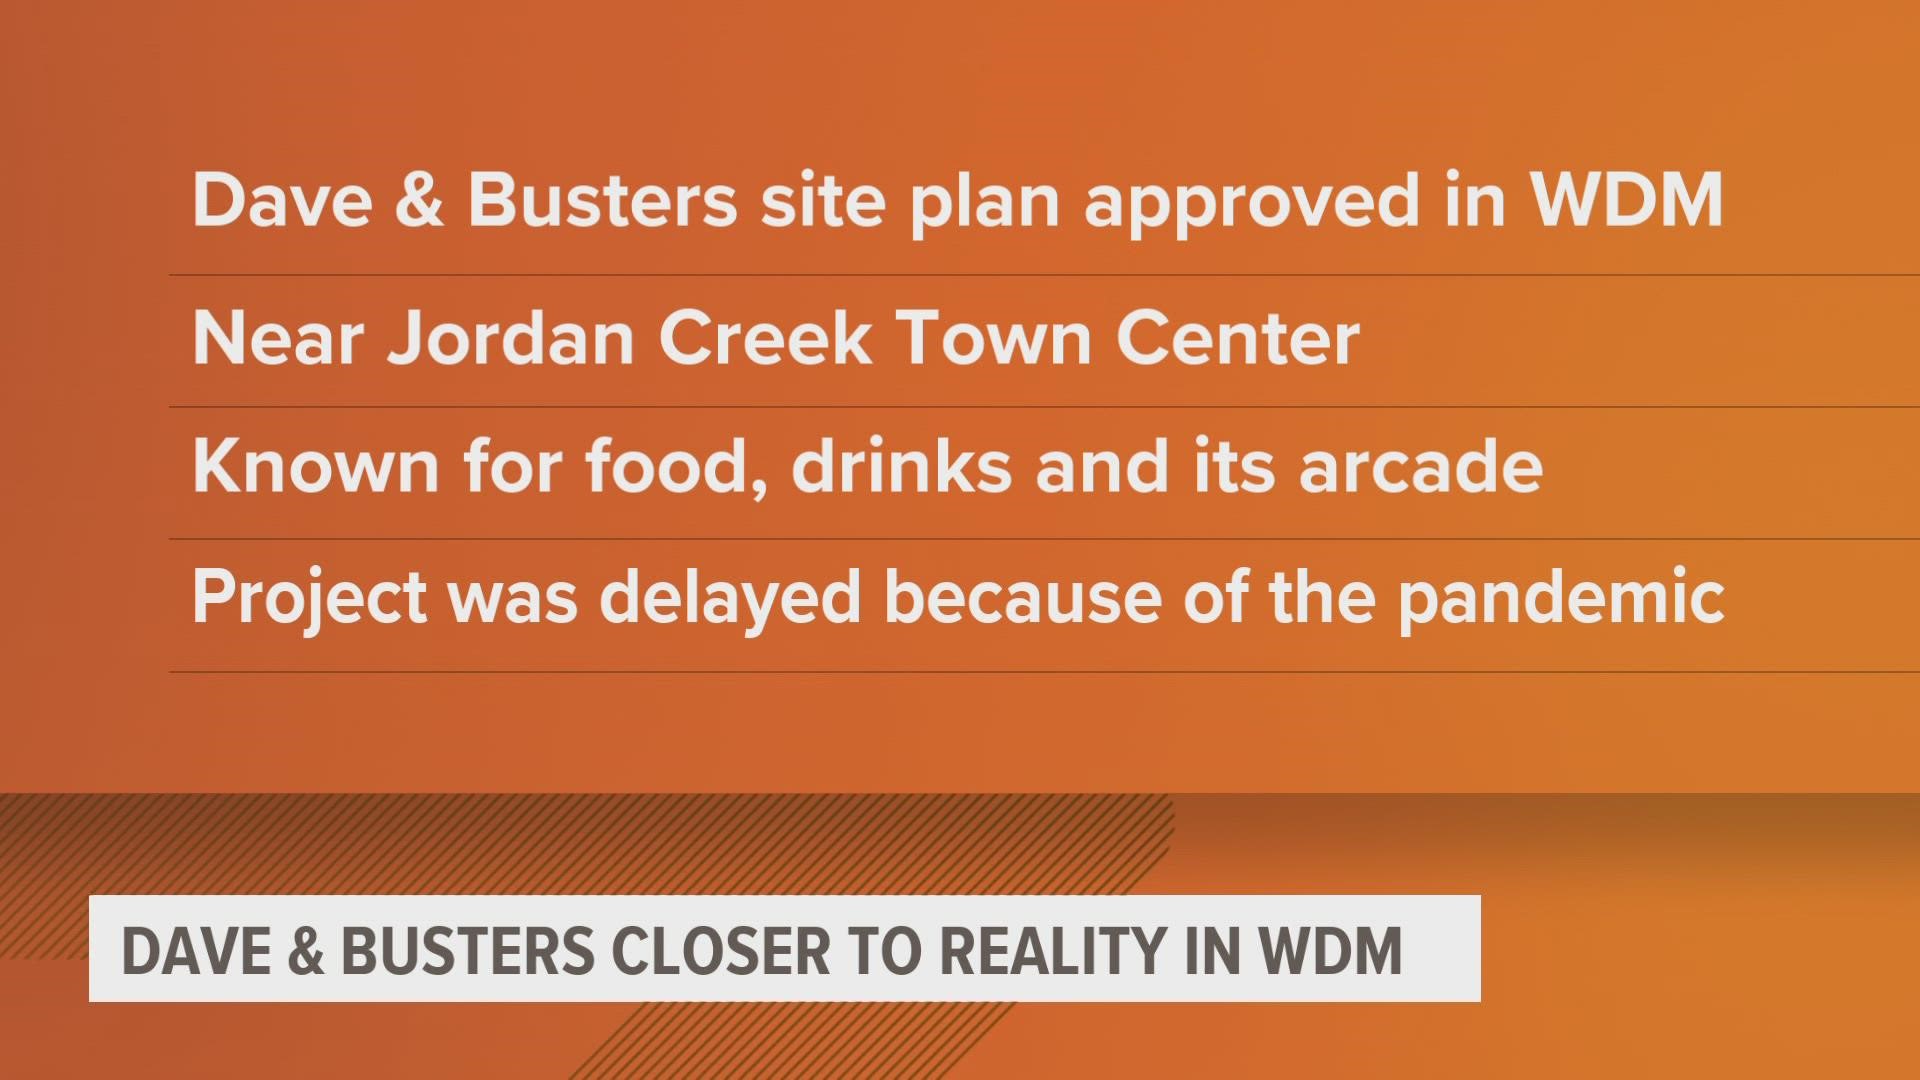 The West Des Moines location is set to be the first Dave & Busters in Iowa.